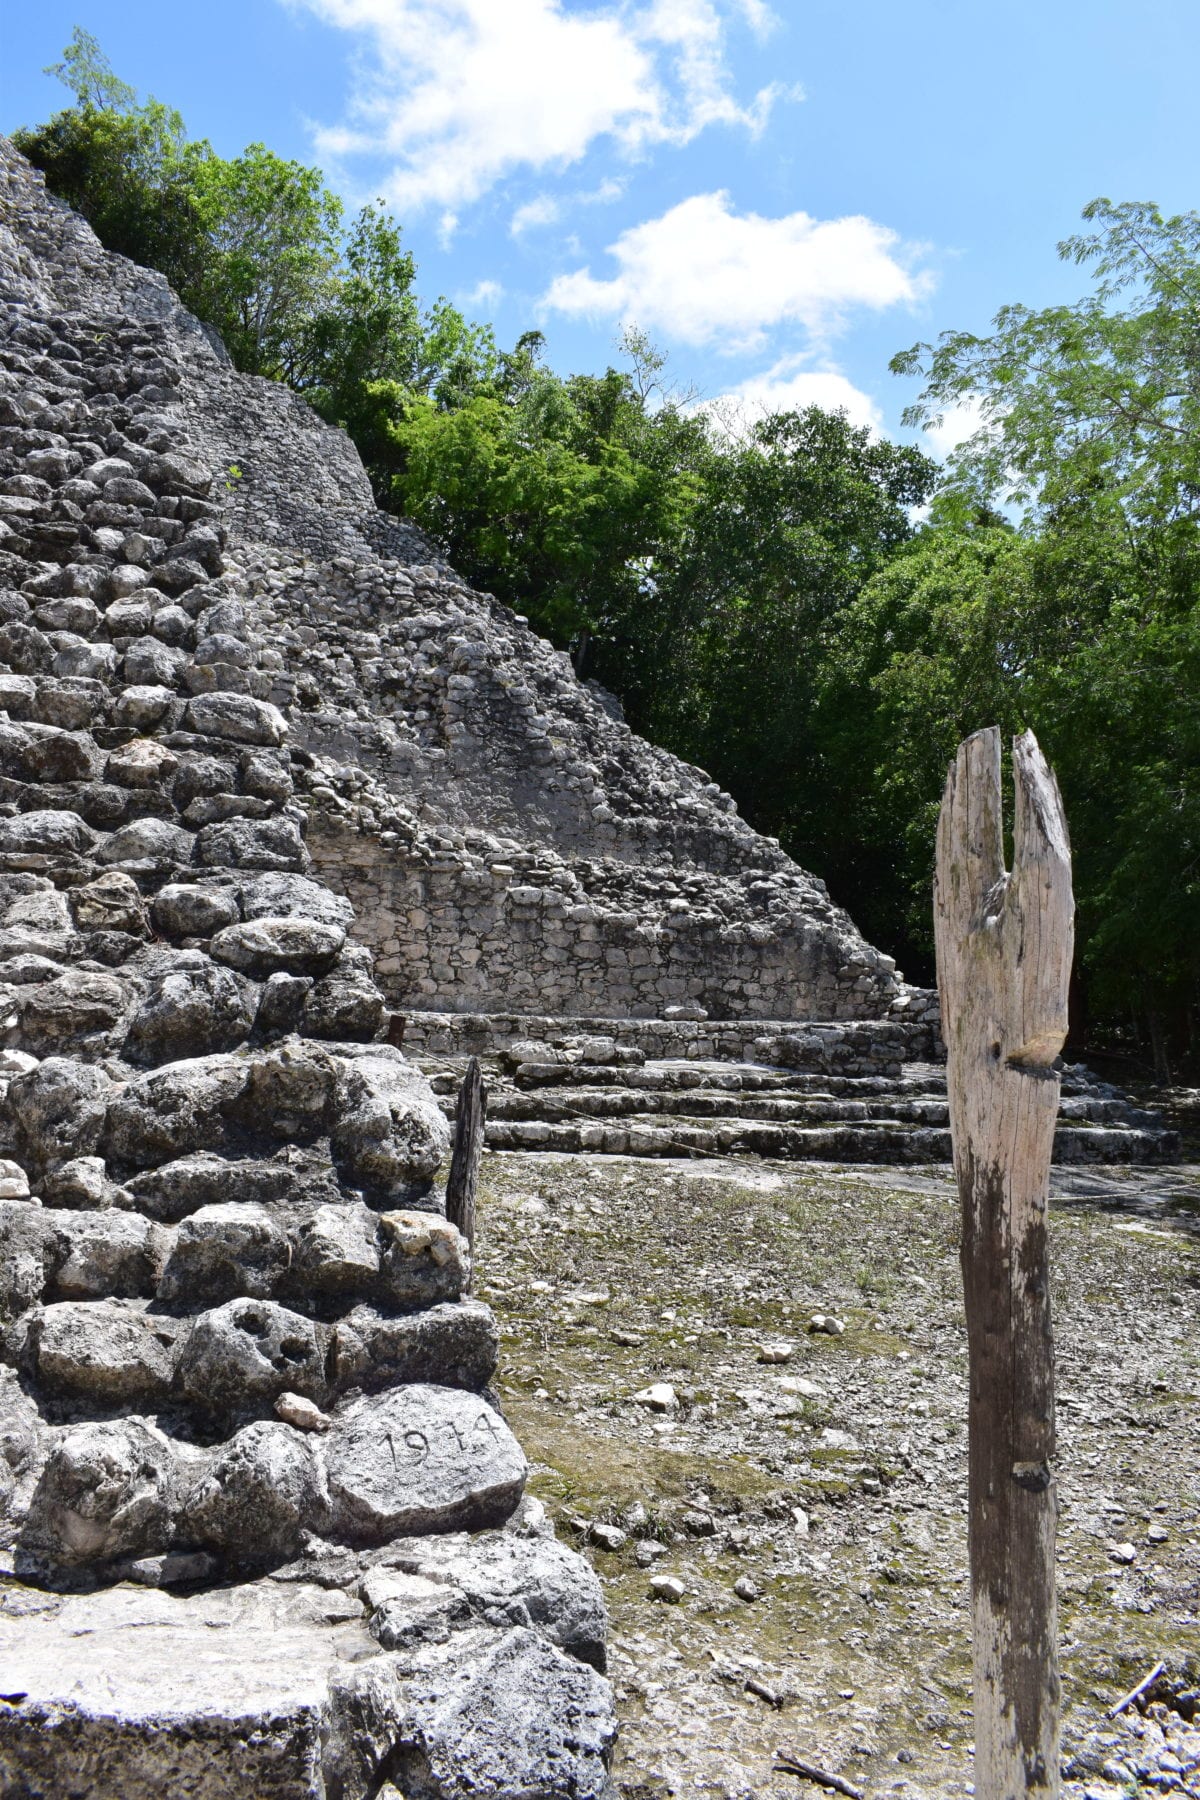 Day trip from Cancun to Coba